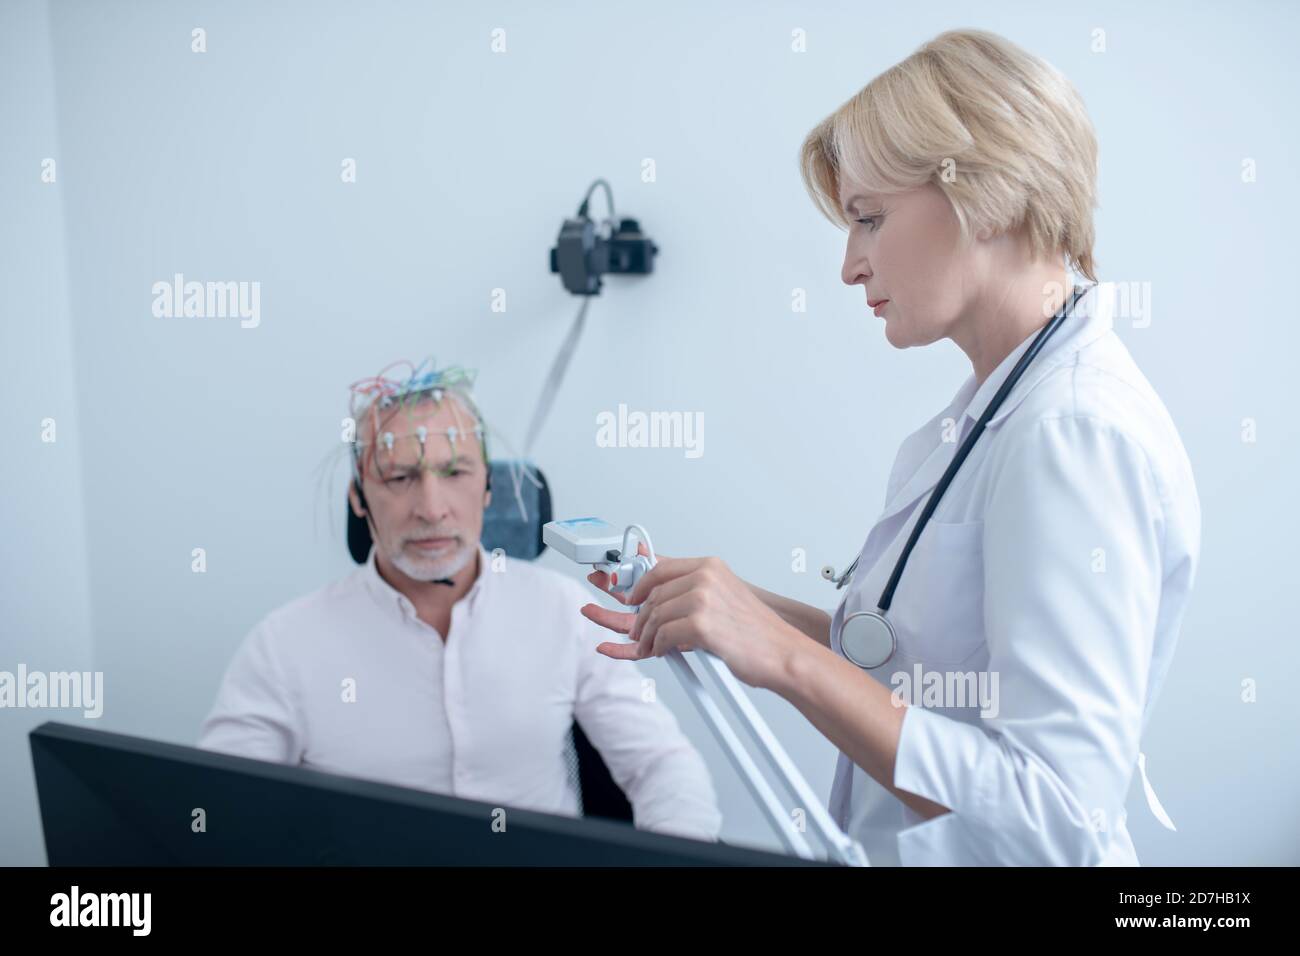 Female neurologist watching gray-haired male patient undergoing electroencephalogram Stock Photo